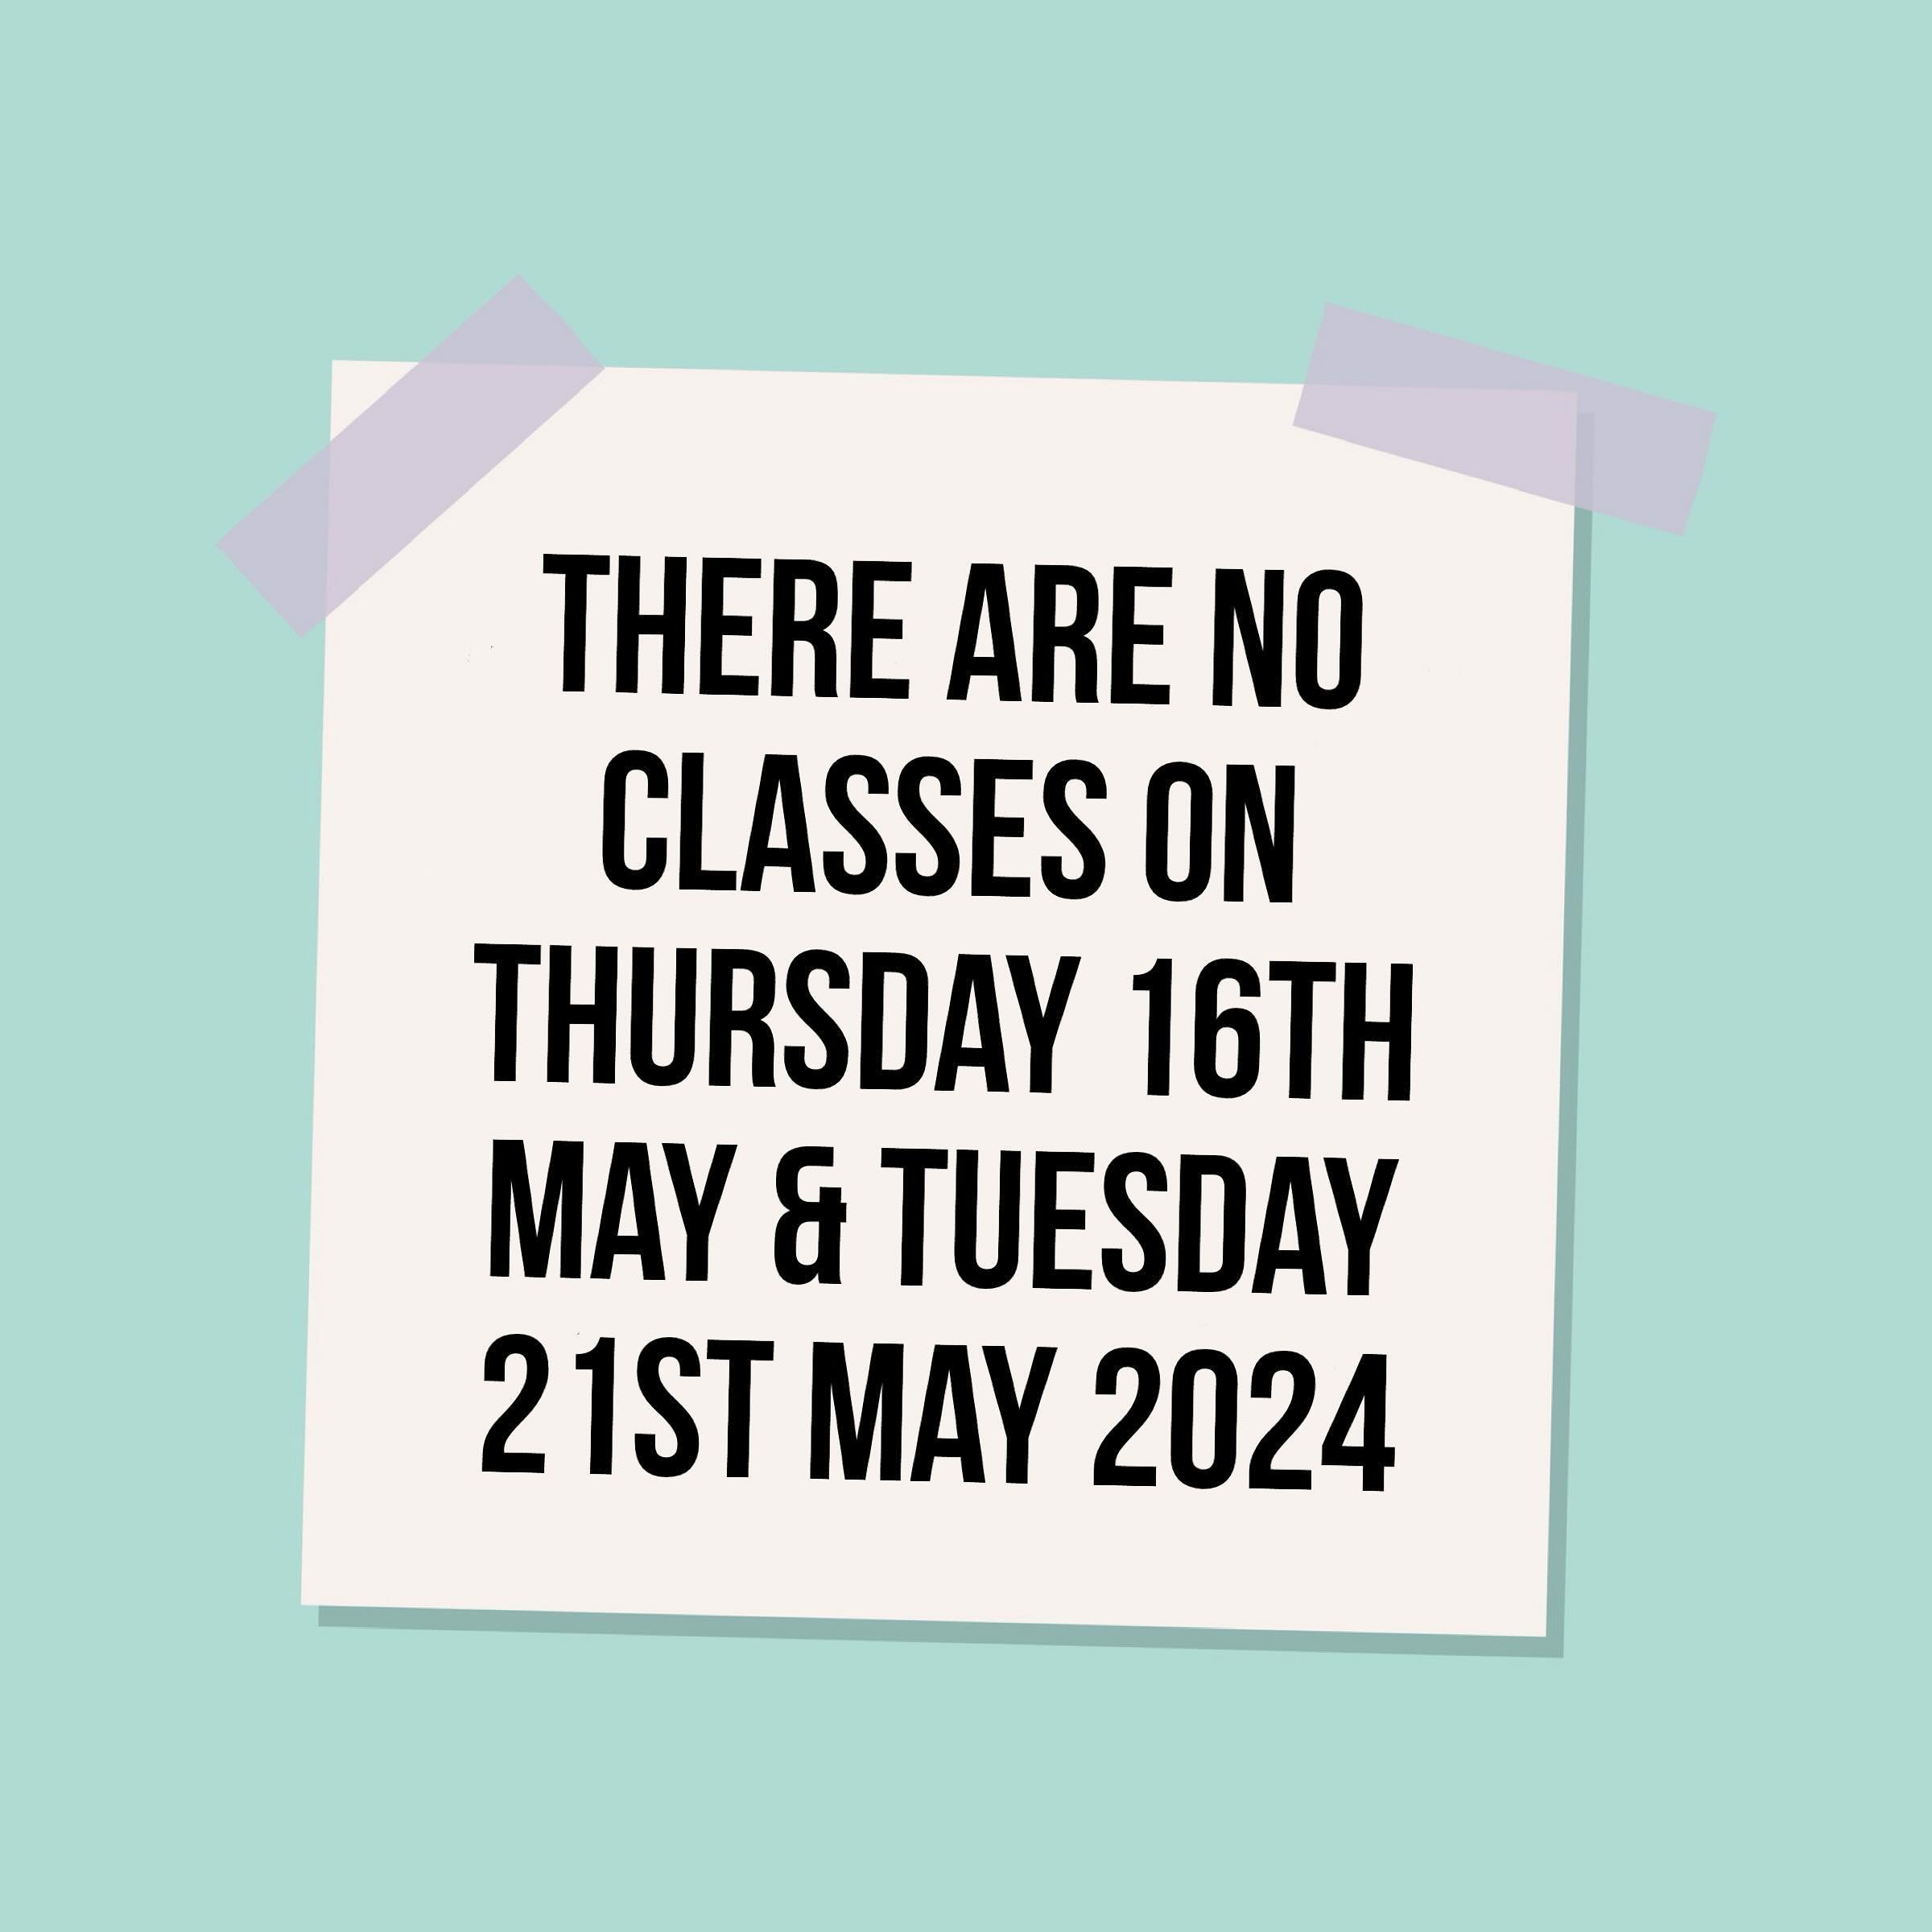 Just a reminder that there are no Flo Fit classes today or next Tuesday. All classes are back from Thursday 23rd May. See you then! 💪 

#flofit #flofitclasses #havefunandgetfit #exercise #fitness #groupfitness #groupexercise #groupexerciseclasses #d